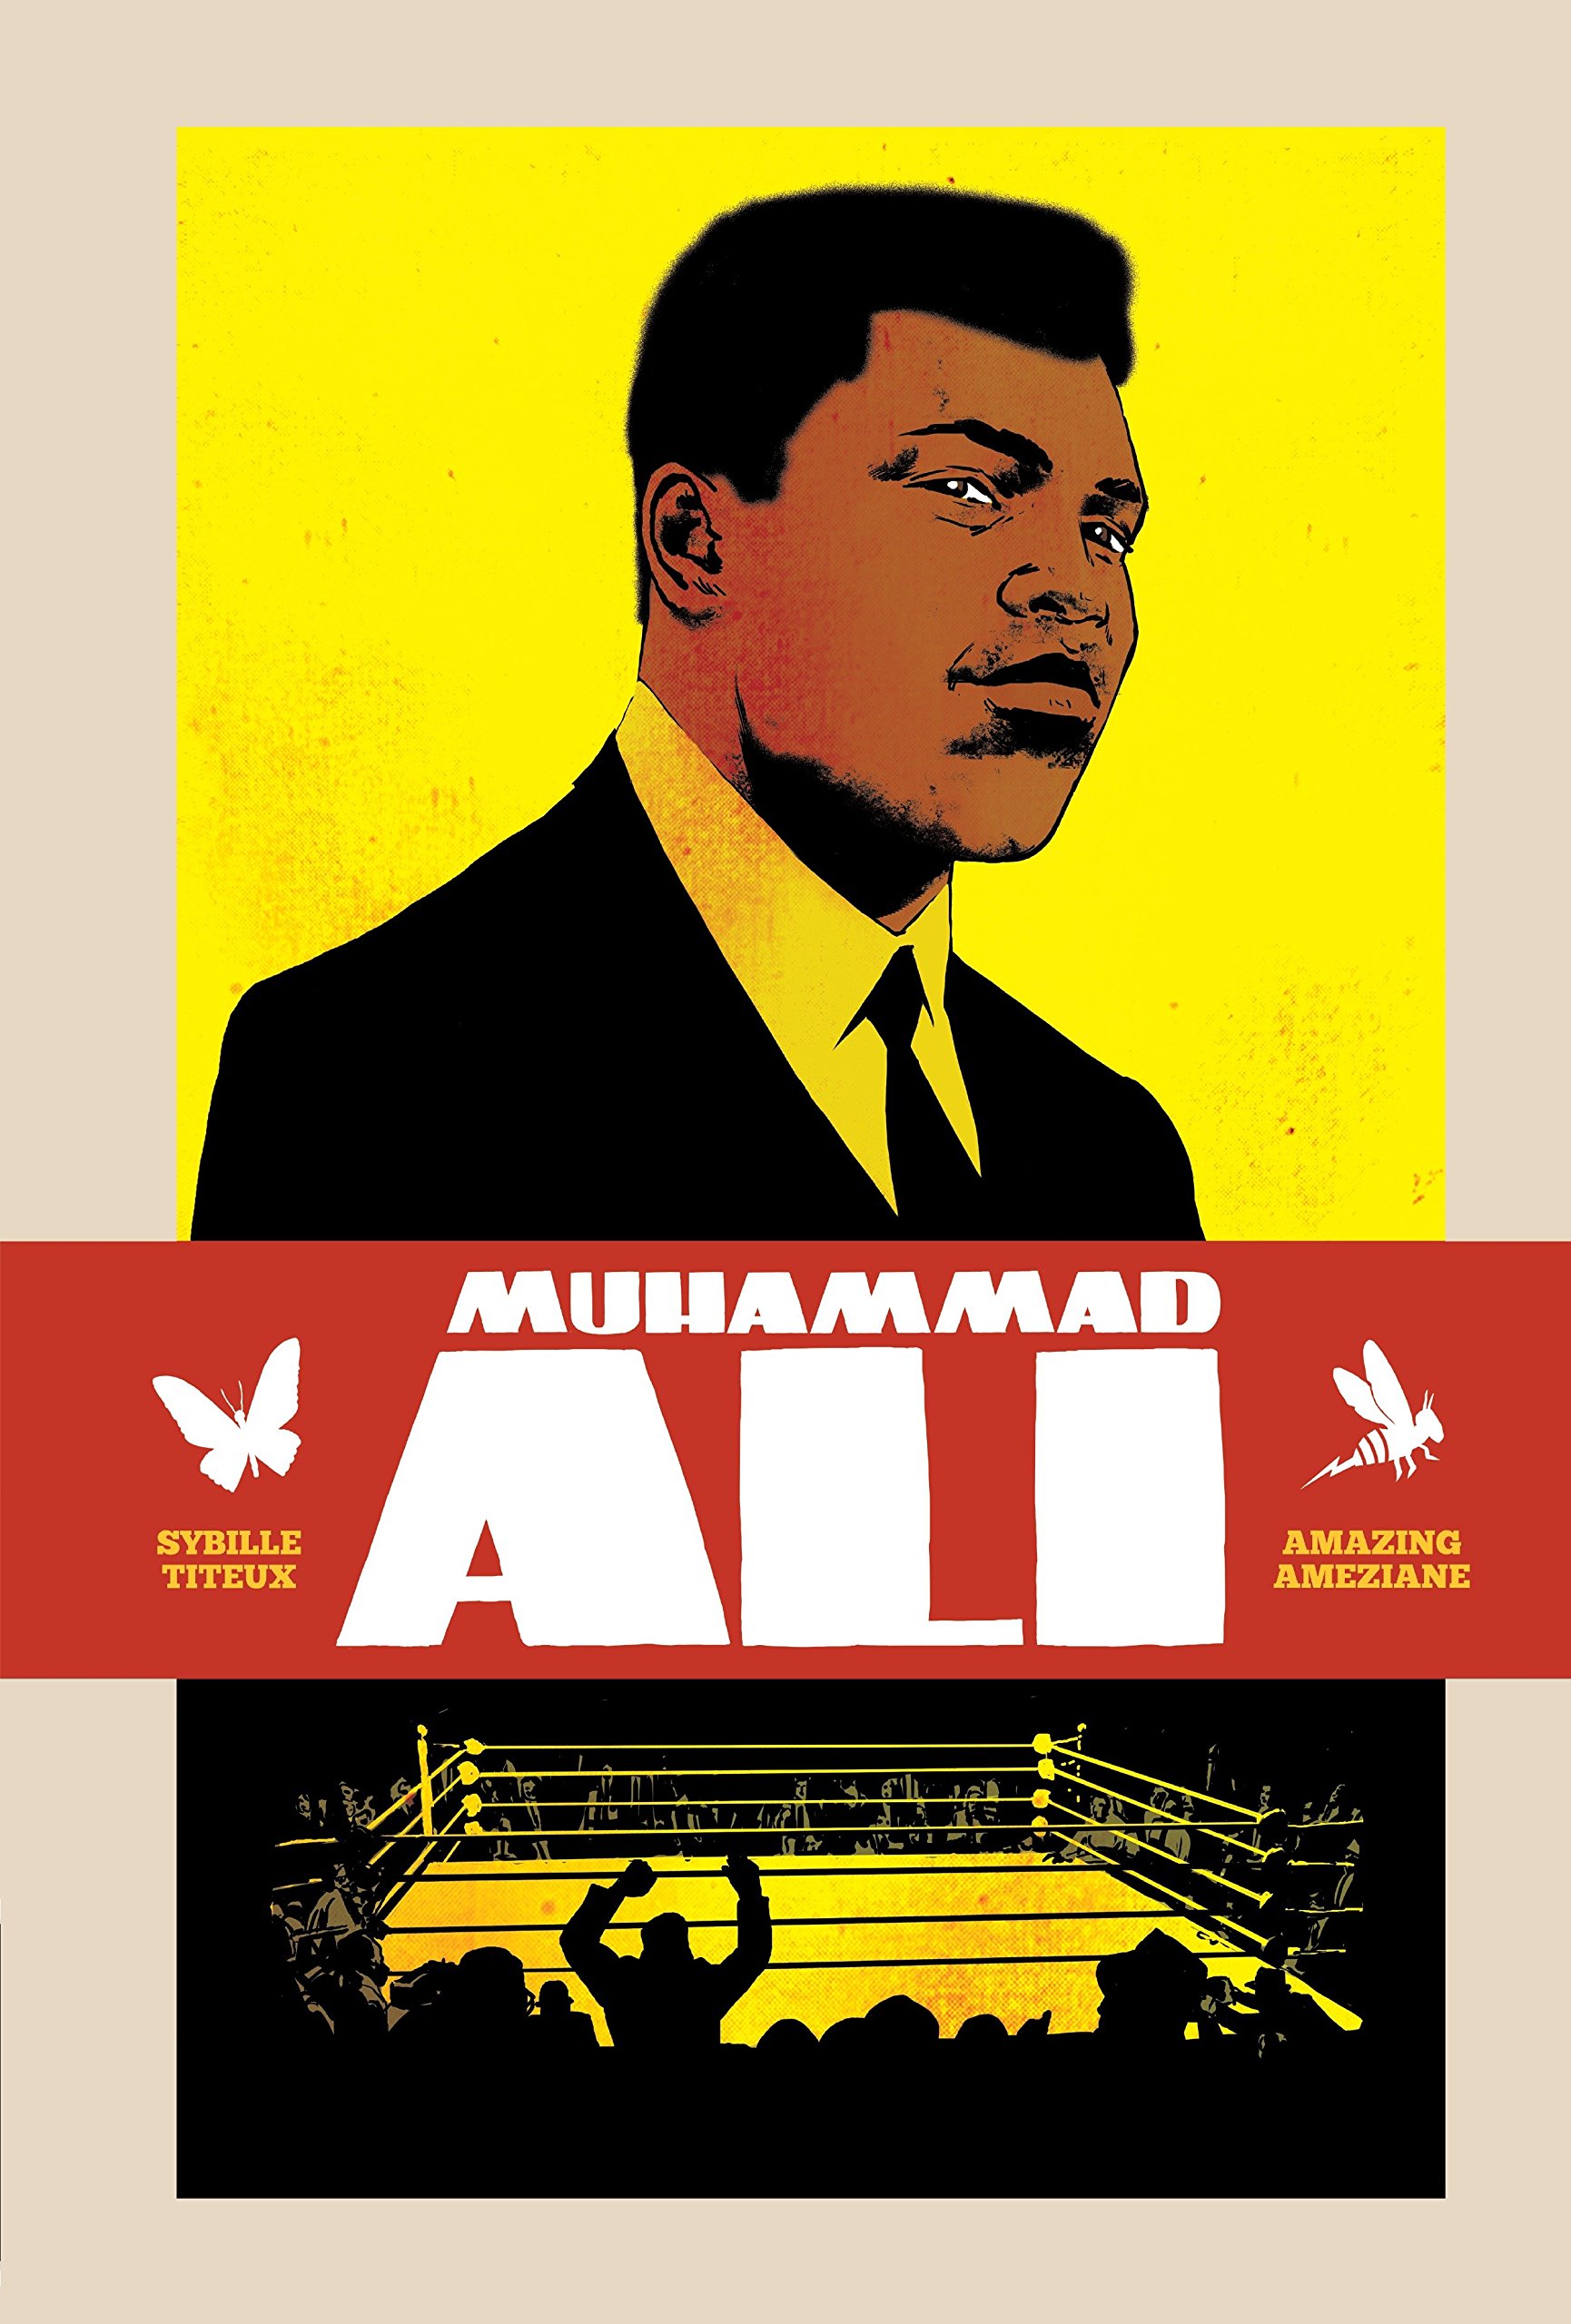 Book cover for Muhammad Ali by Sybille Titeux.